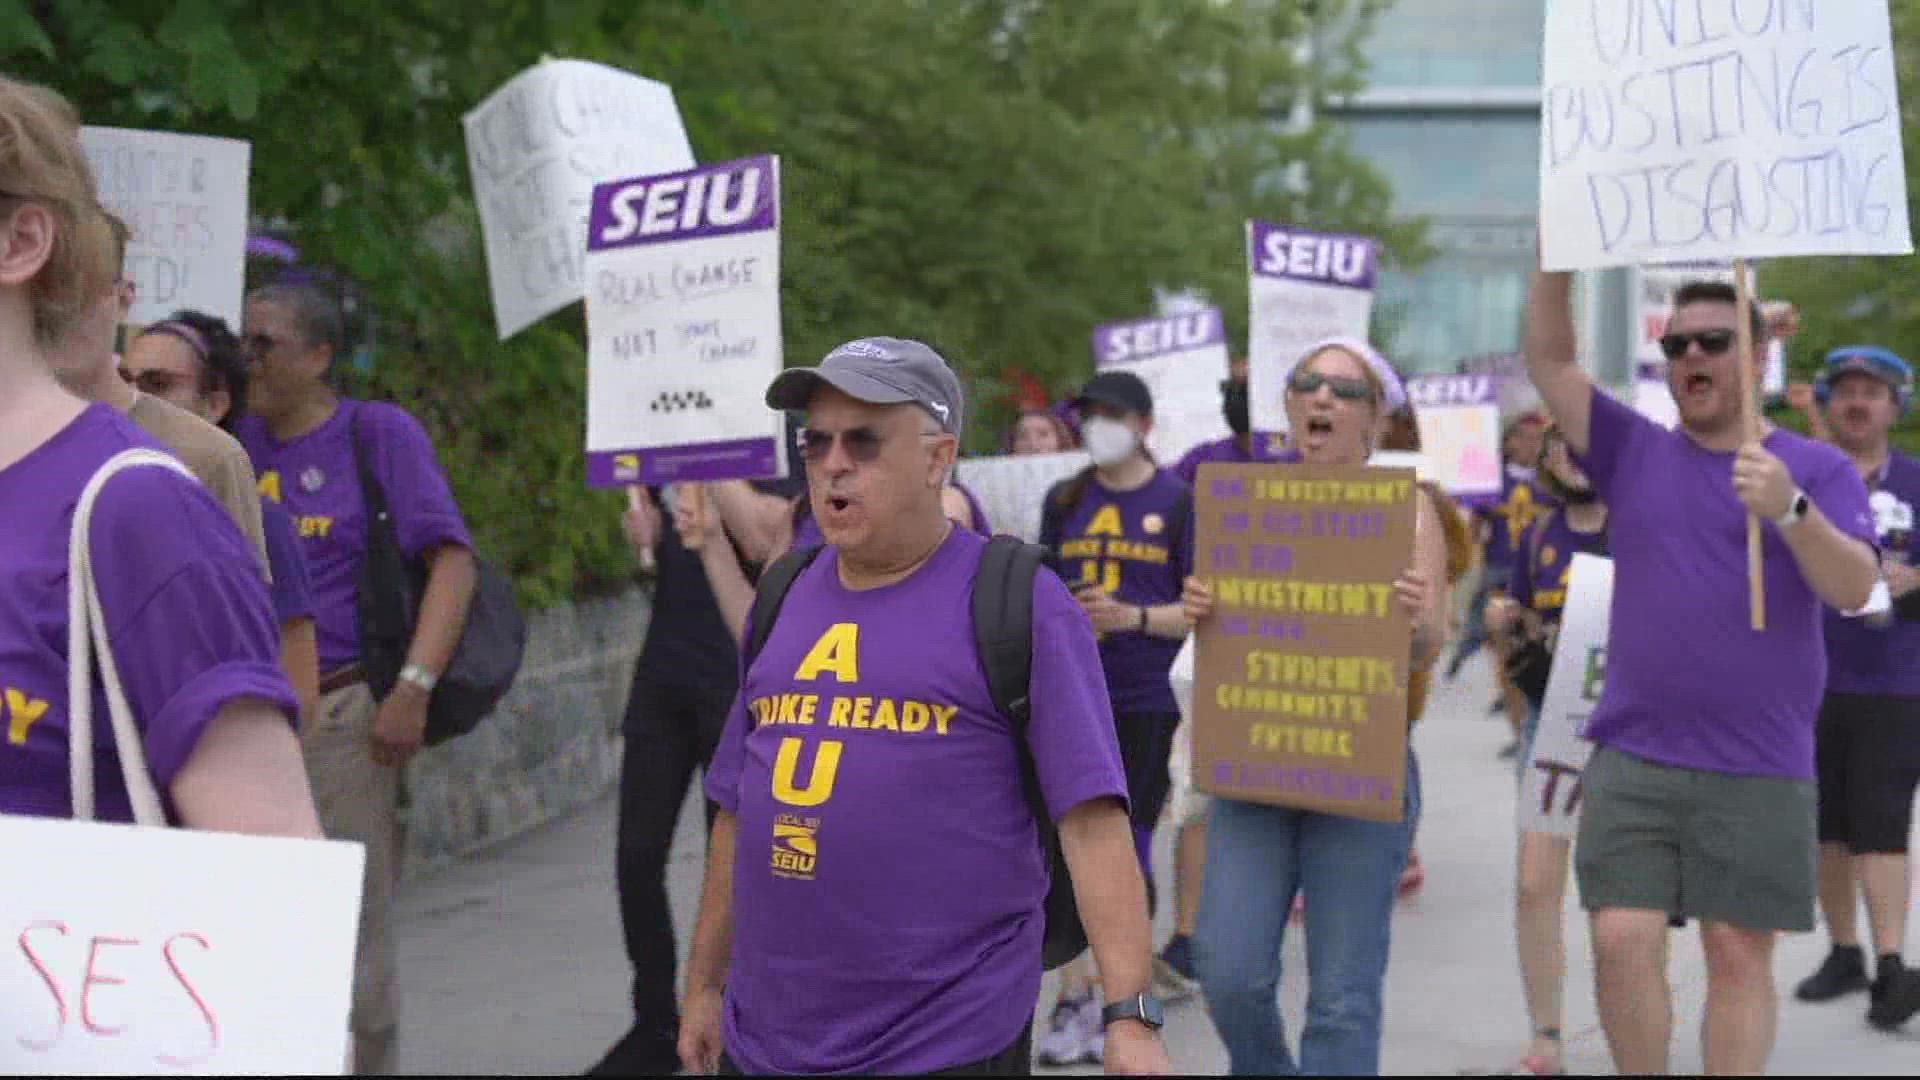 Today, about 550 union employees went on strike. They're asking for pay raises over the next two years. But they also want reforms made to the overall pay structure.